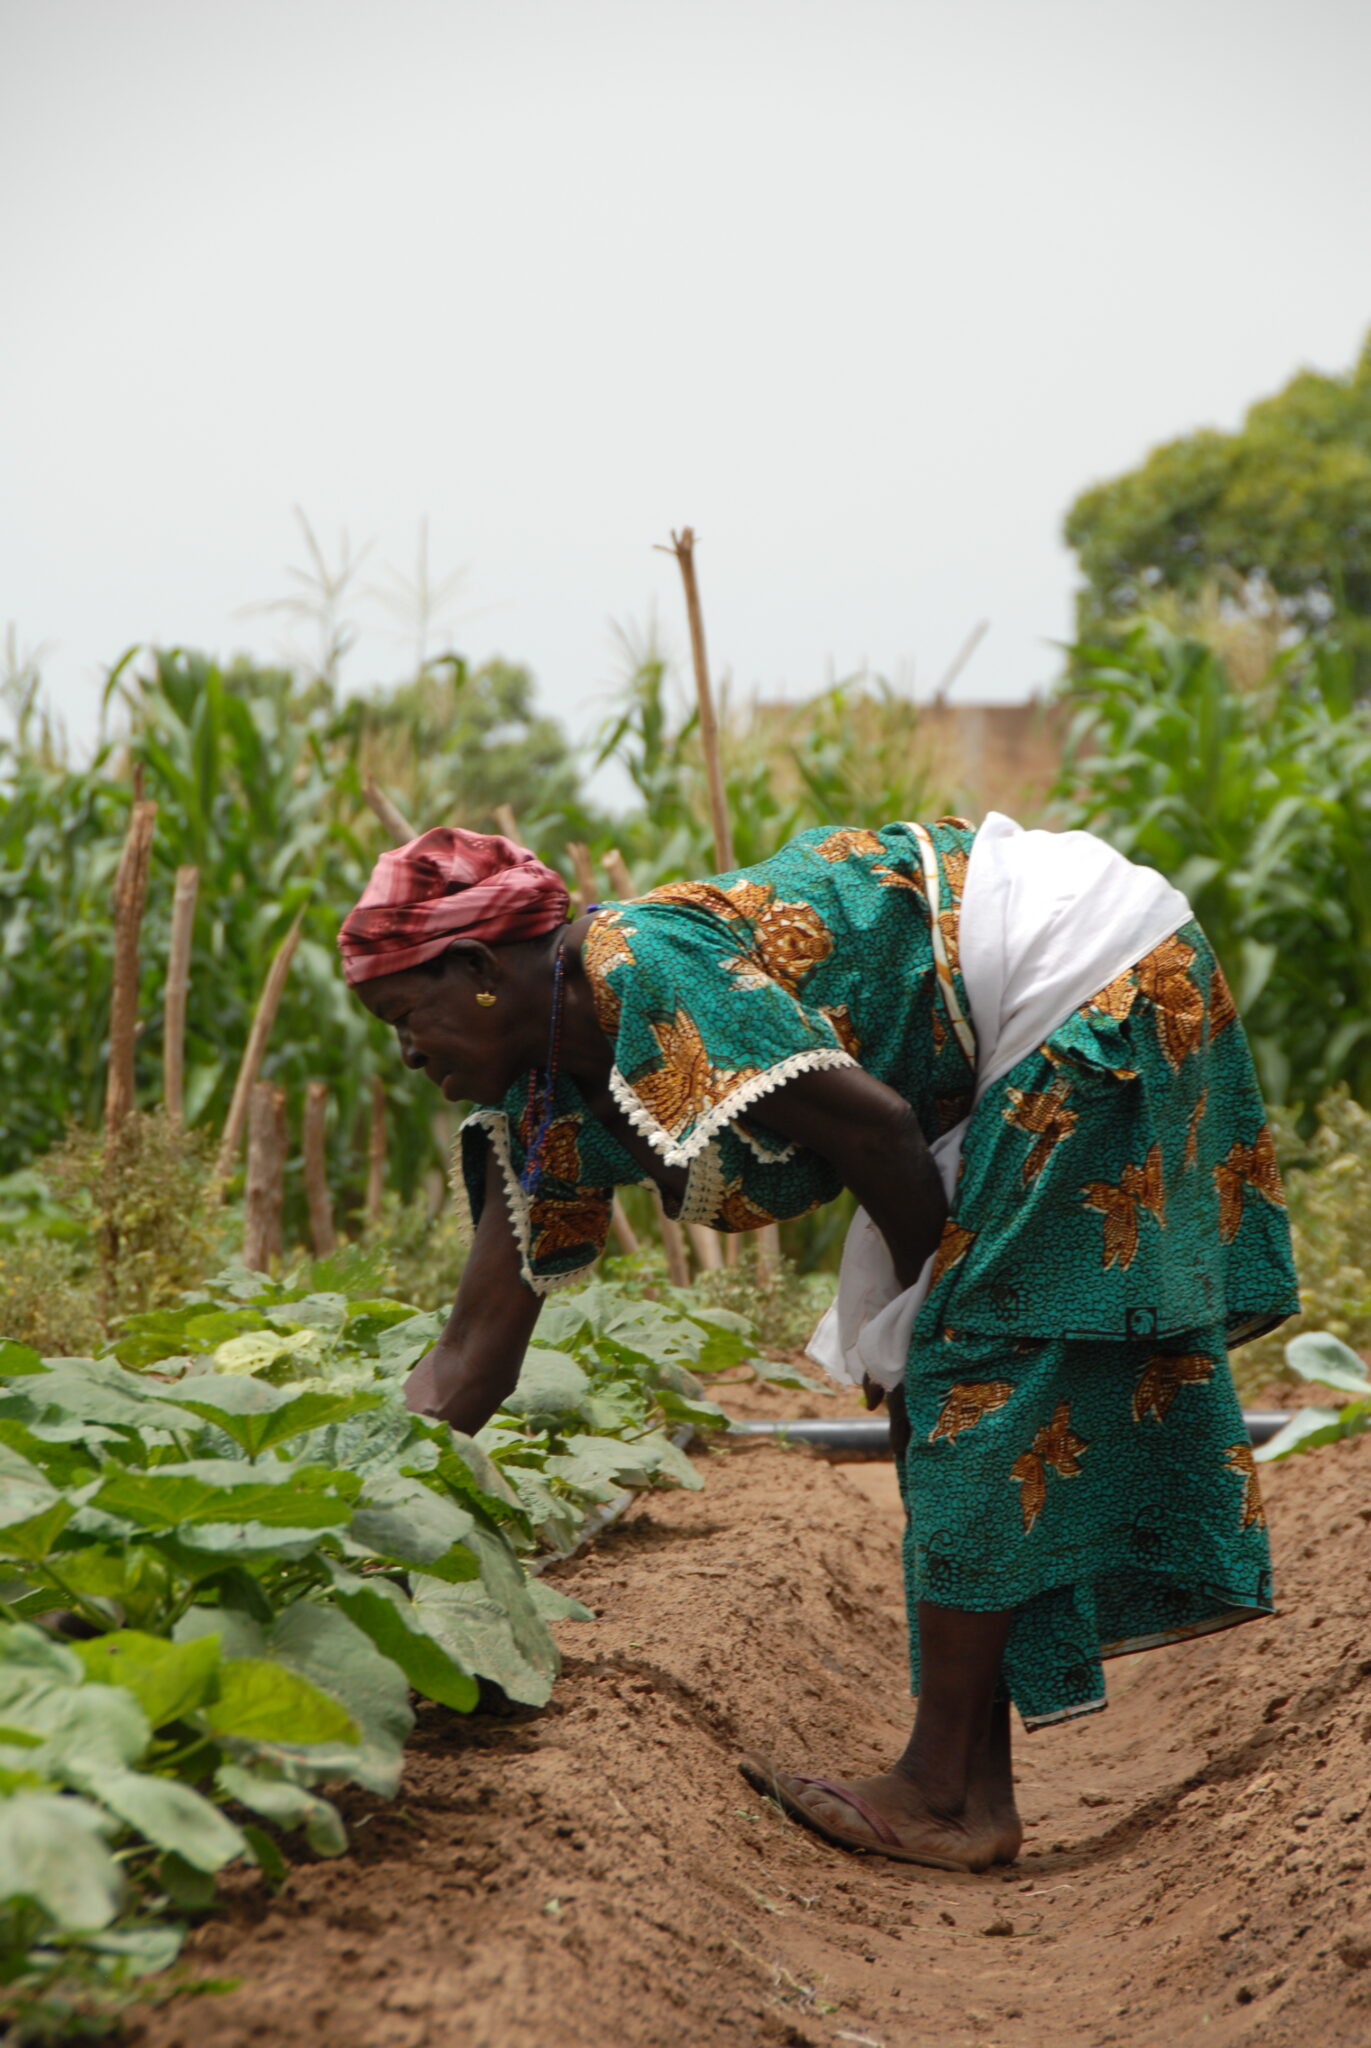 A woman tends to a garden watered by solar-powered drip irrigation, one application of solar energy for sustainable development